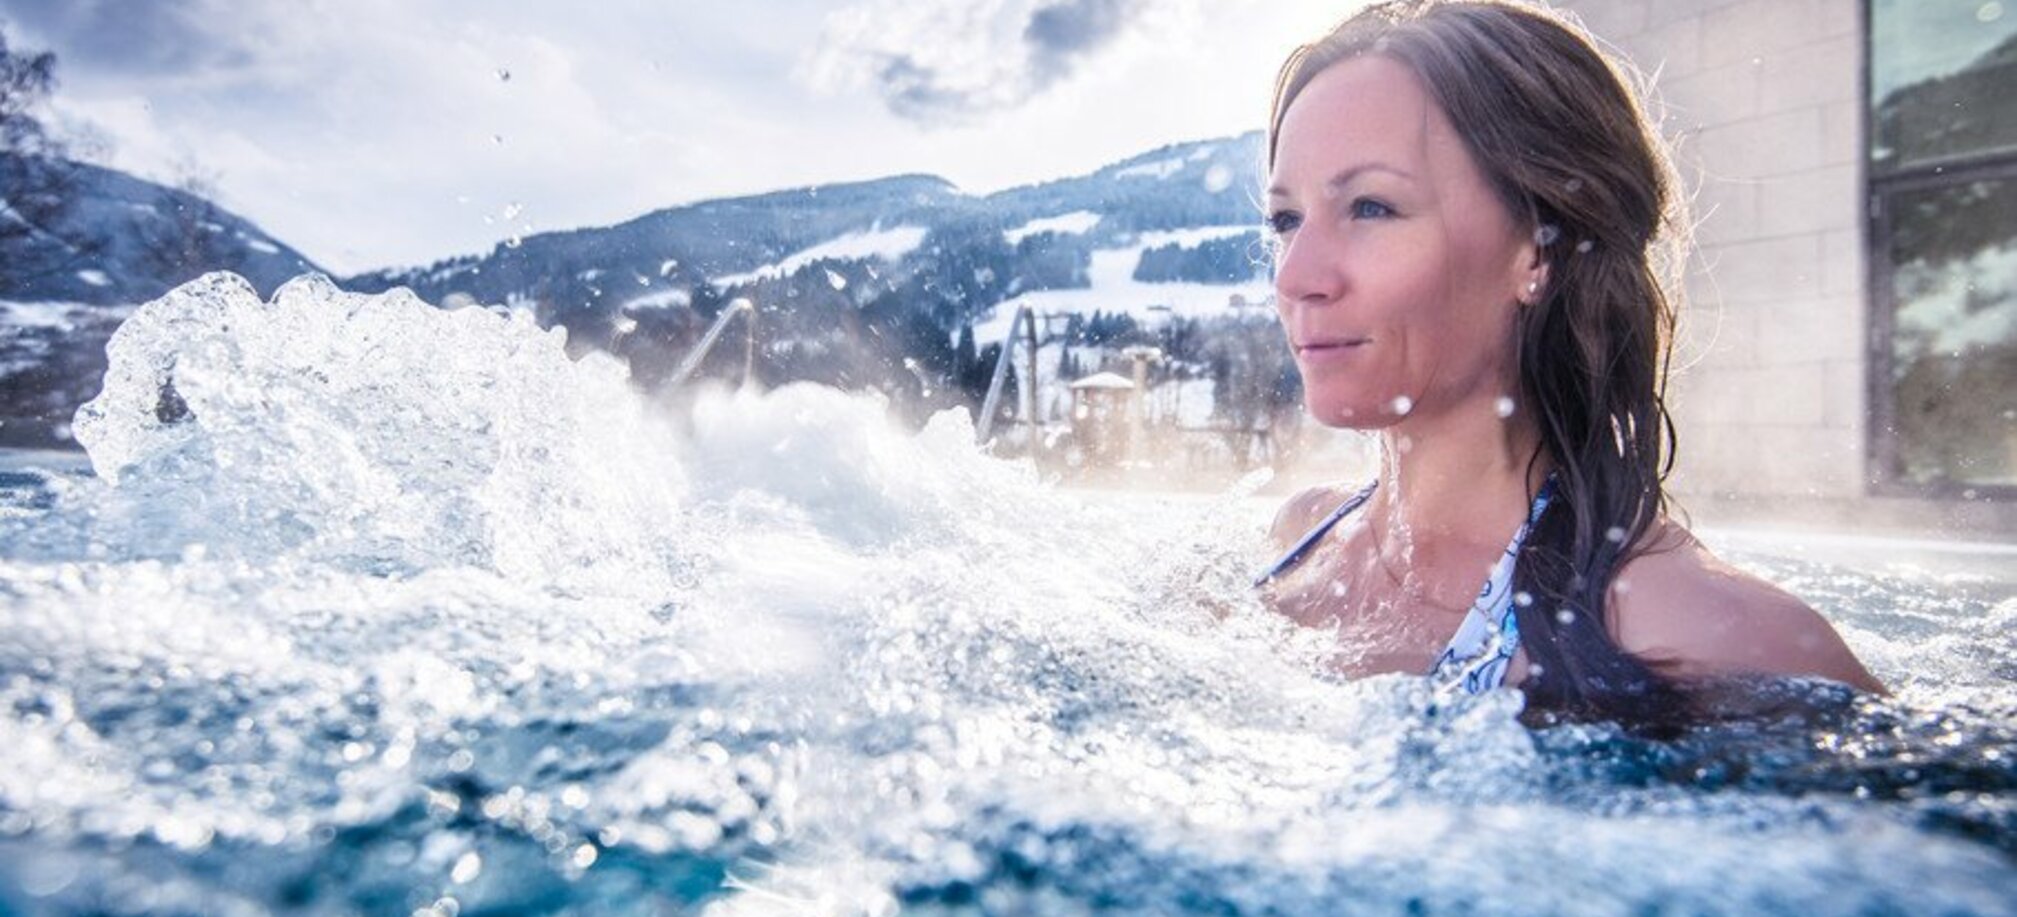 A woman is in a swimming pool and in front of her the water is bubbling and in the background you can see mountains with ski slopes